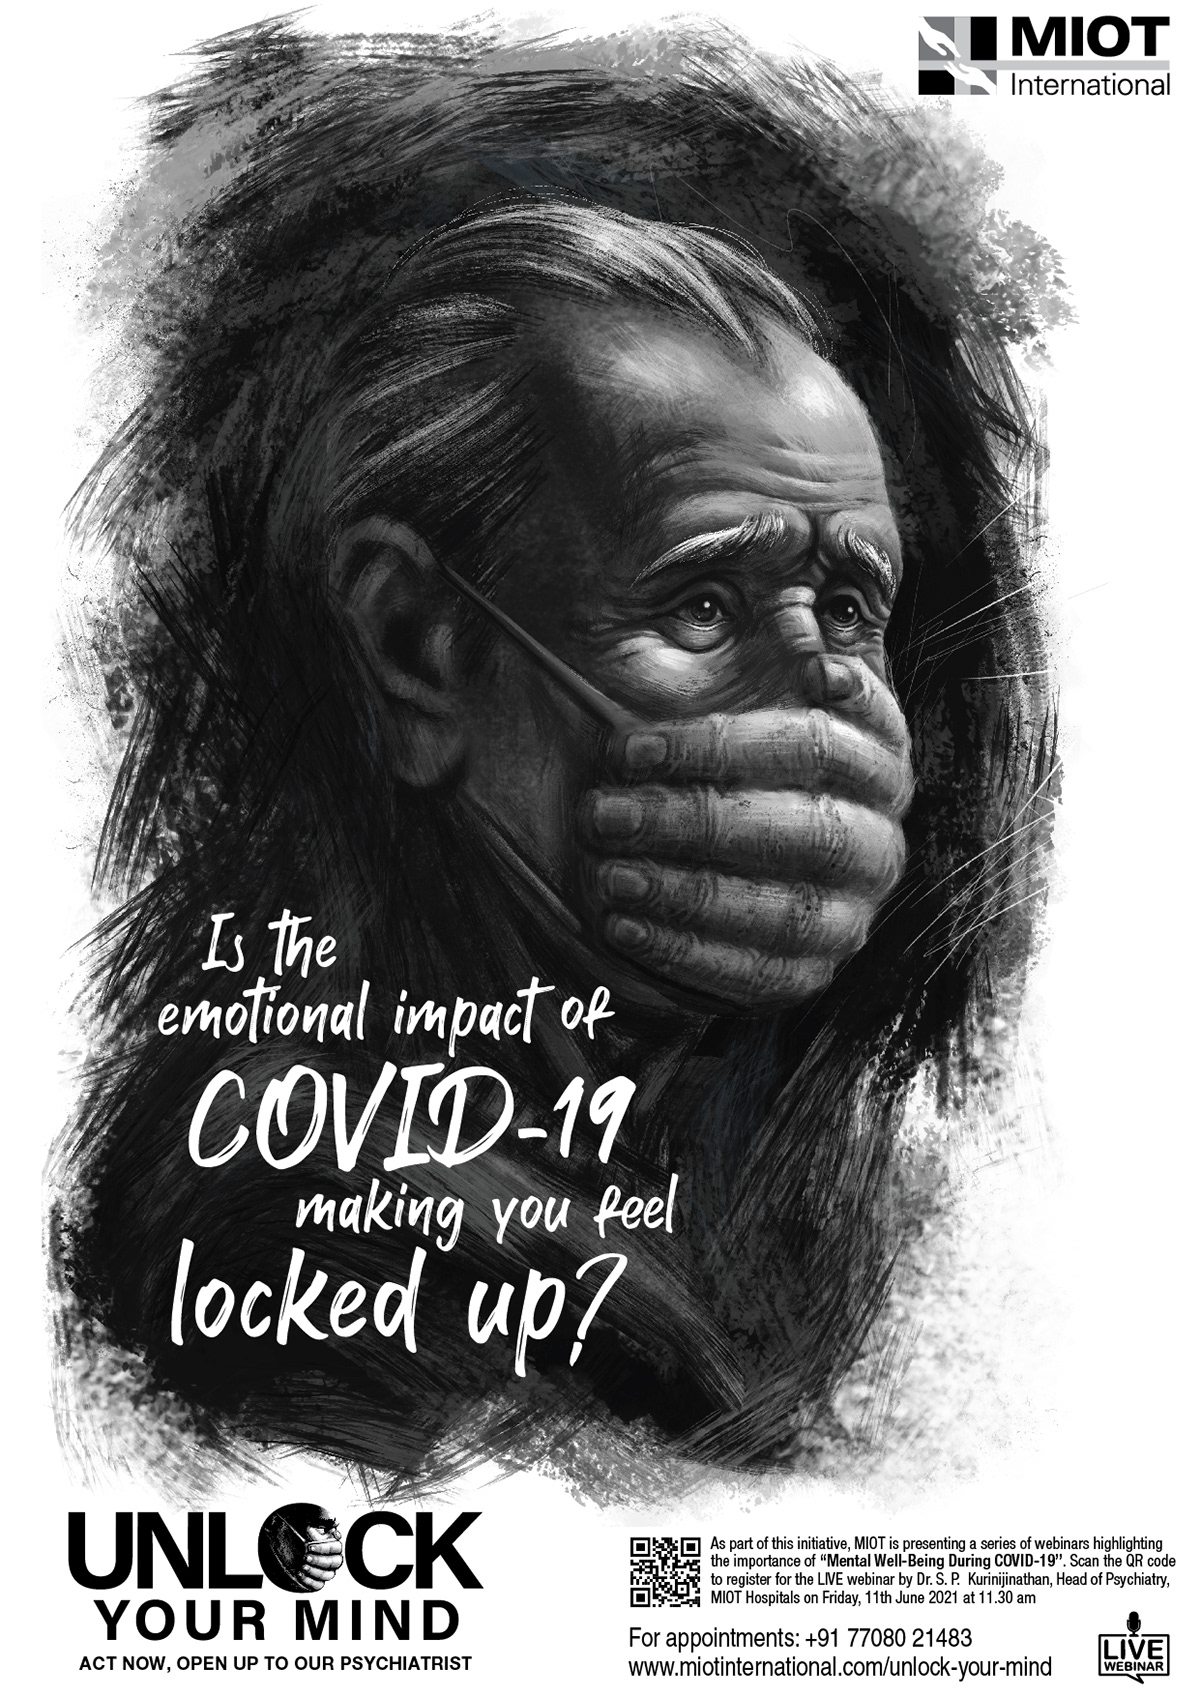 COVID-19 Impact design COVID-19 pandemic COVID-19 Poster MIOT Hospital MIOT